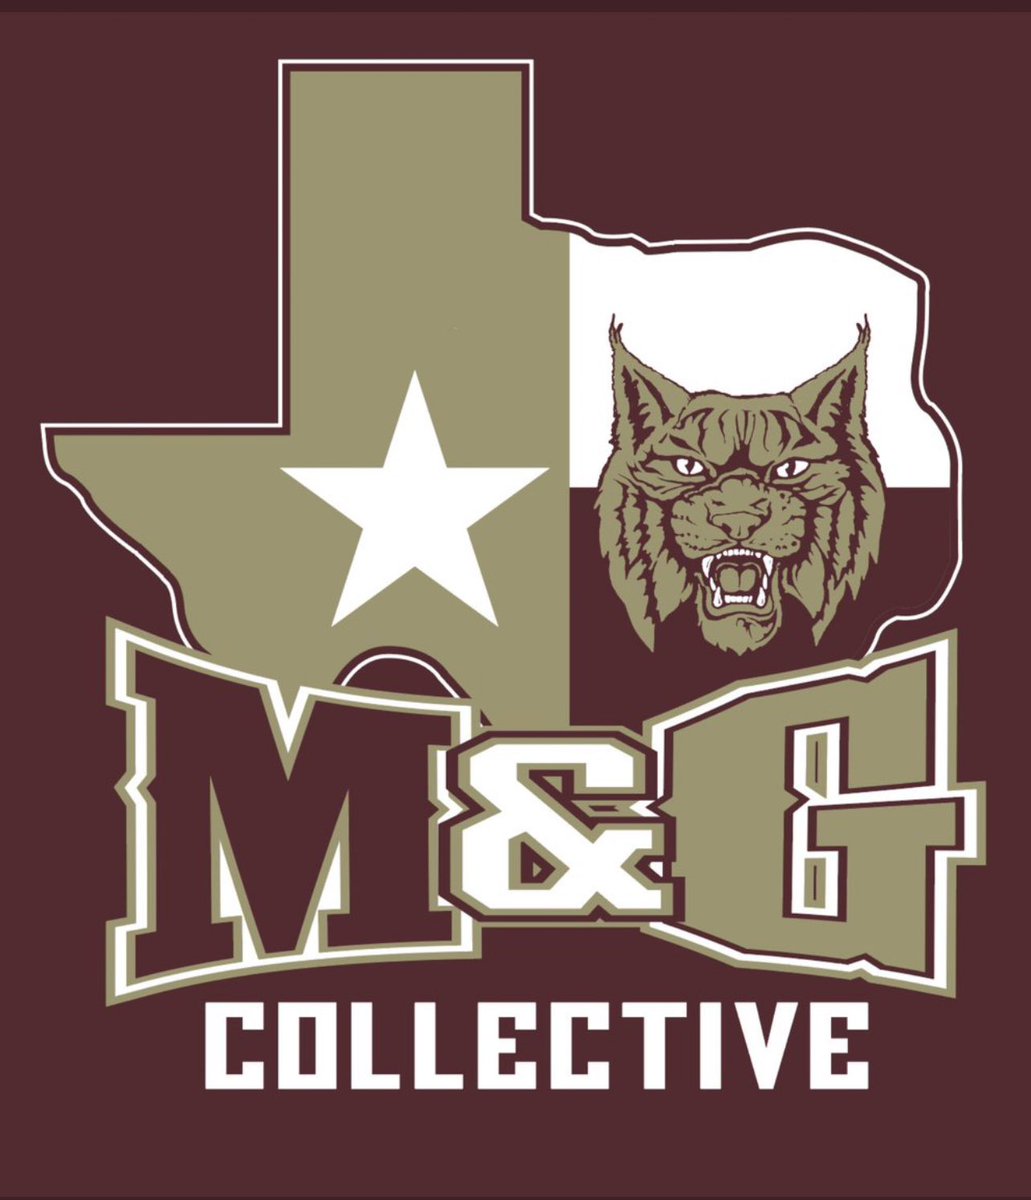 NOW IS THE TIME TO GET INVOLVED CLICK THE LINK SUBSCRIBE BUILD @TxStateBobcats ATHLETICS maroonandgolden.com/nil/ #TakeBackTexas